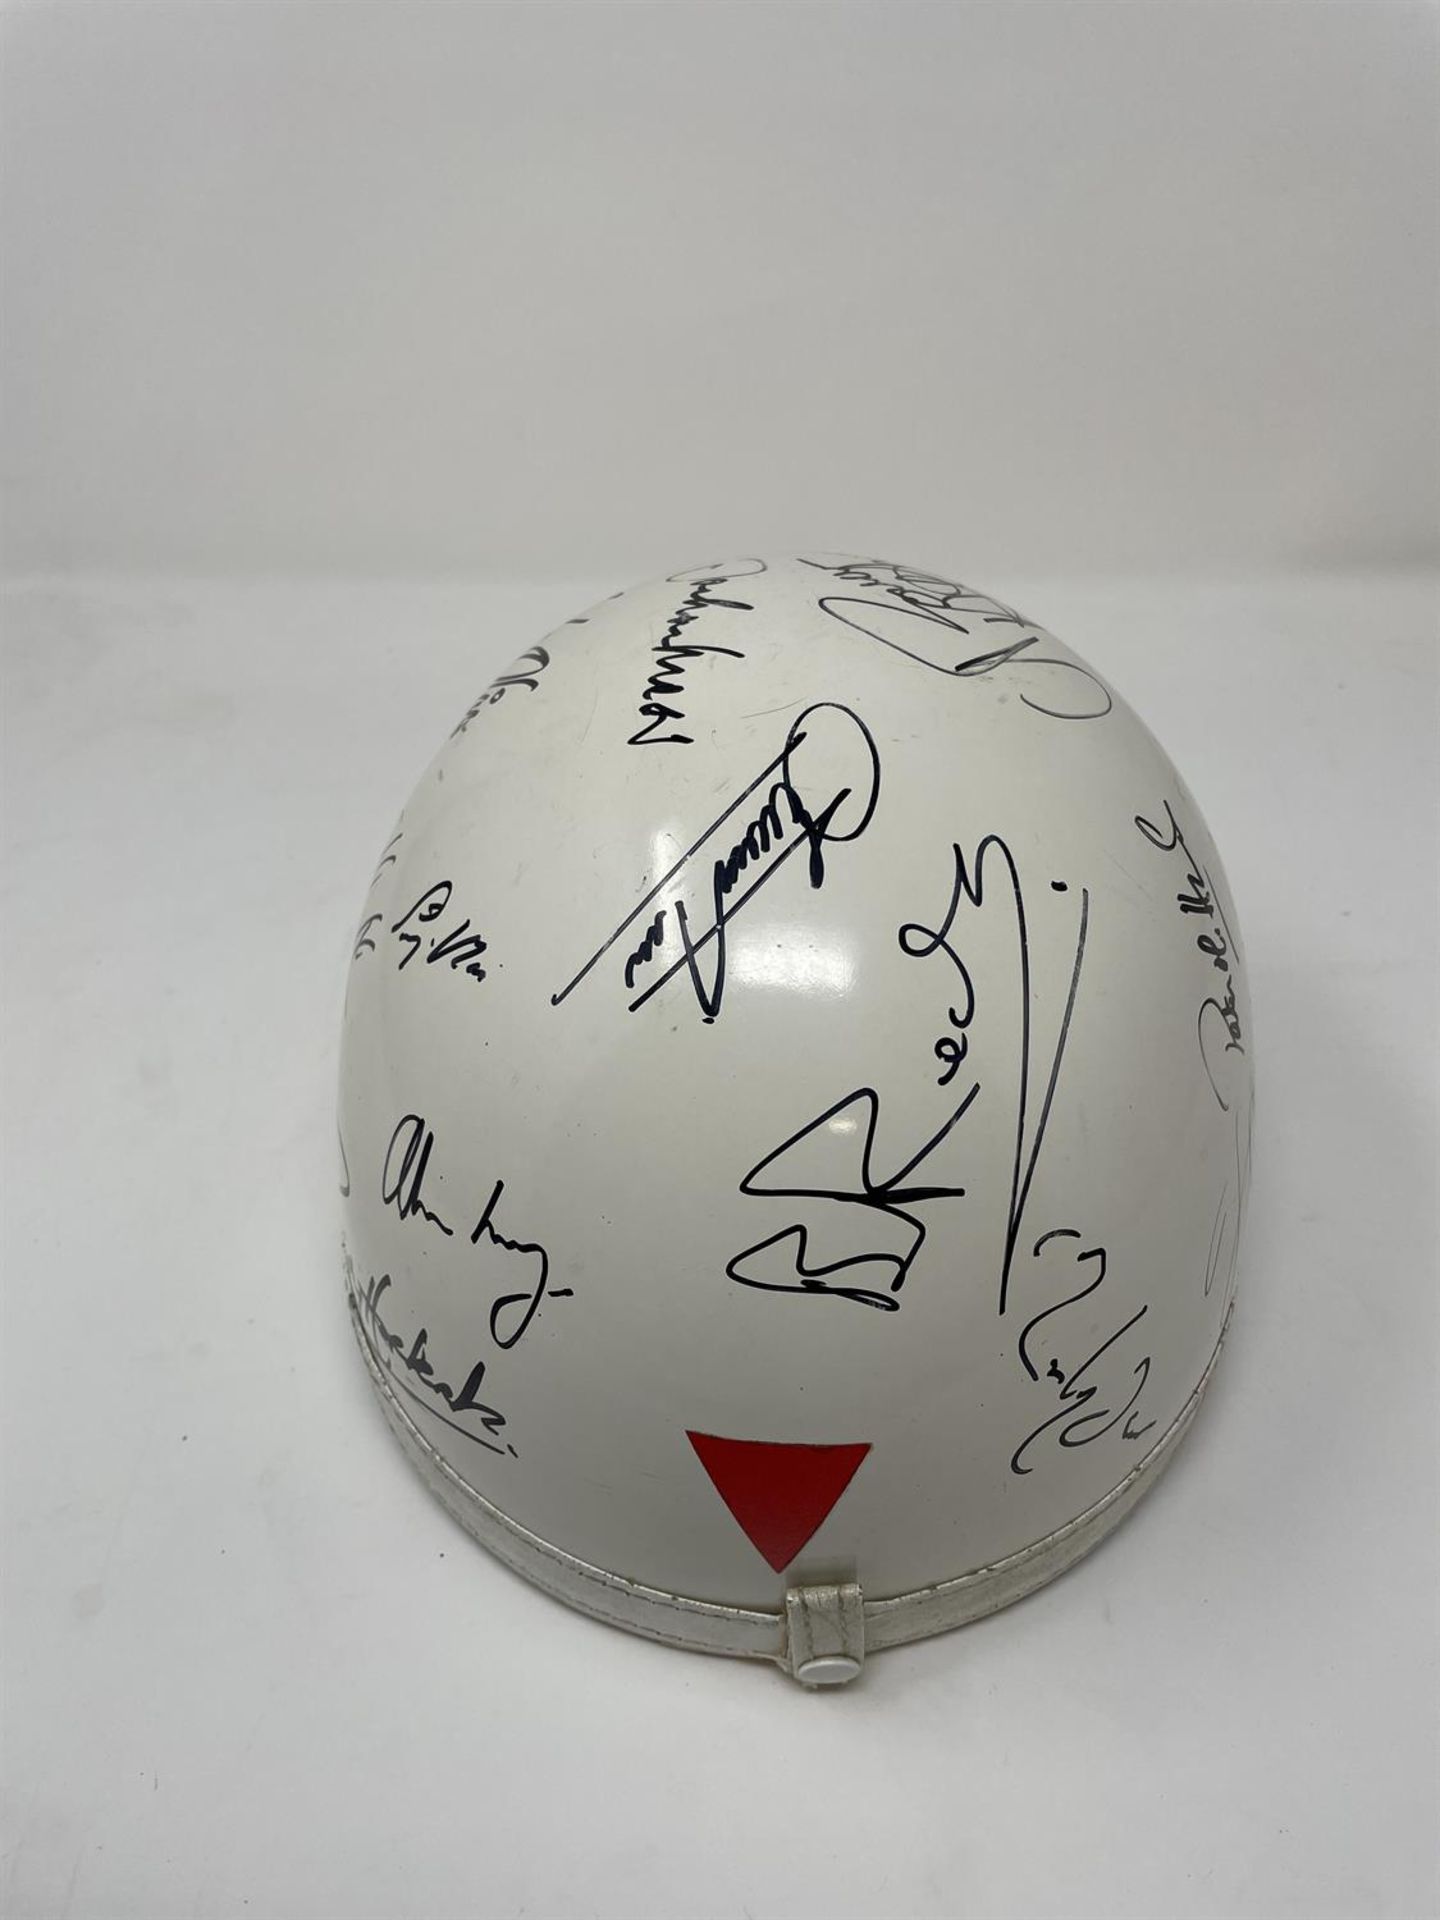 1950s-Style Race Helmet with Multiple Signatures Including Sir Jackie Stewart and Sir Stirling Moss - Image 3 of 5